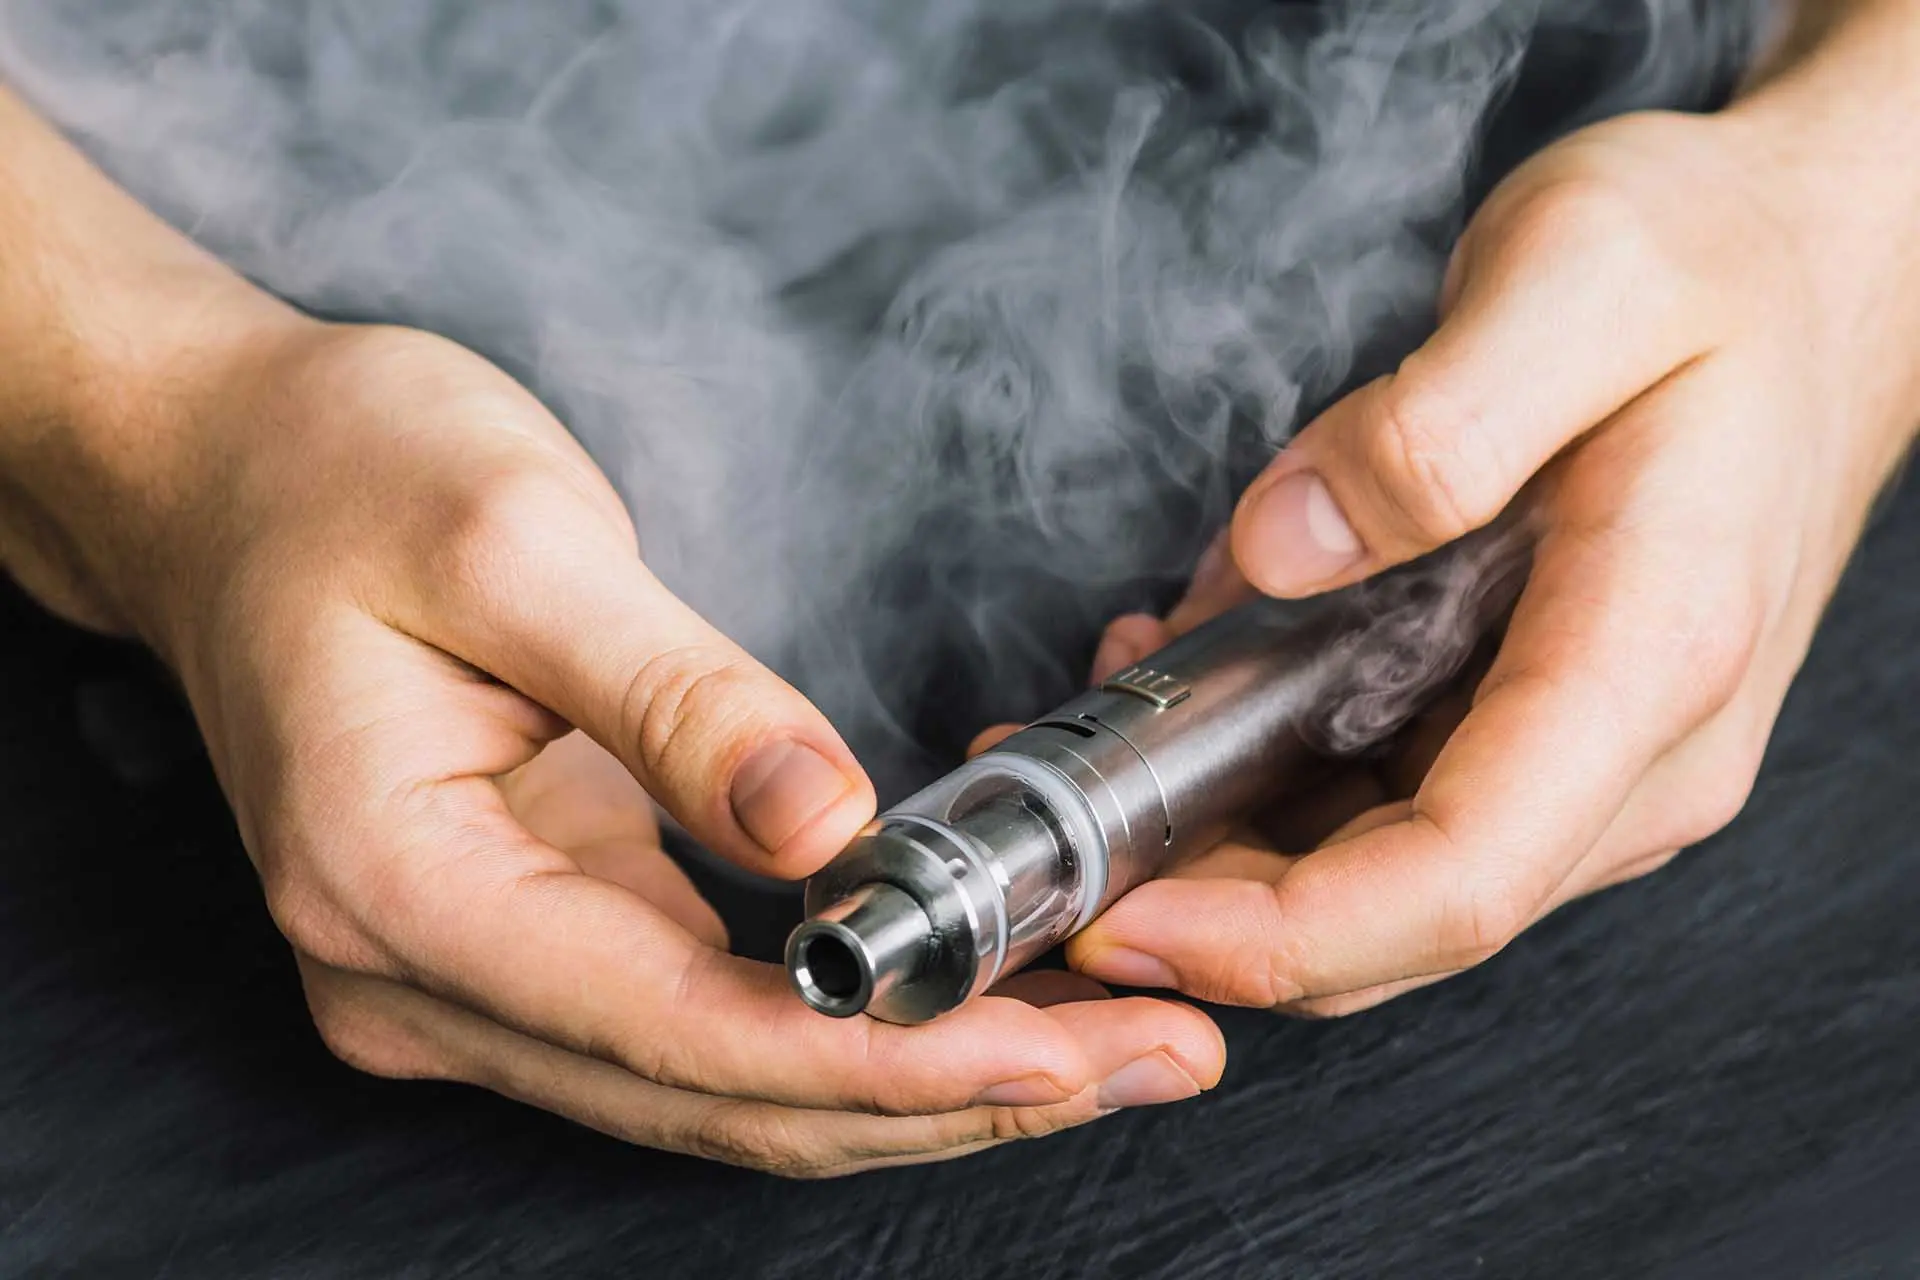 FDA Raises Alarm: The Hidden Dangers of Synthetic Nicotine in Vapes Could Be Worse Than You Think